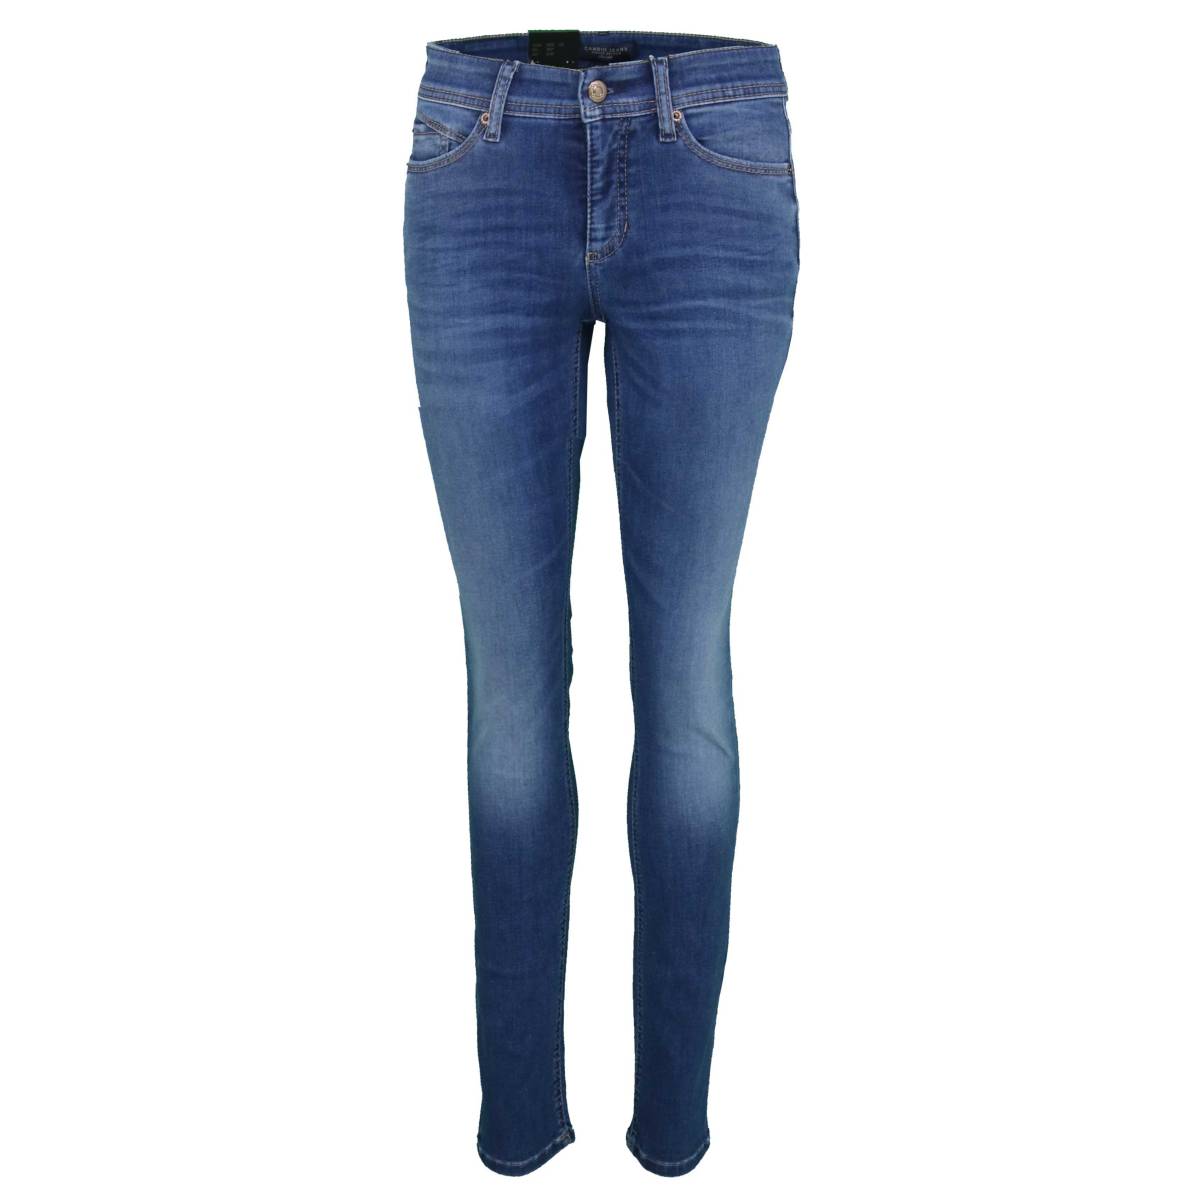 Cambio Parla Jeans cambio trousers parla 9137-0015-02 jeans at penninkhoffashion.com POIHYKU